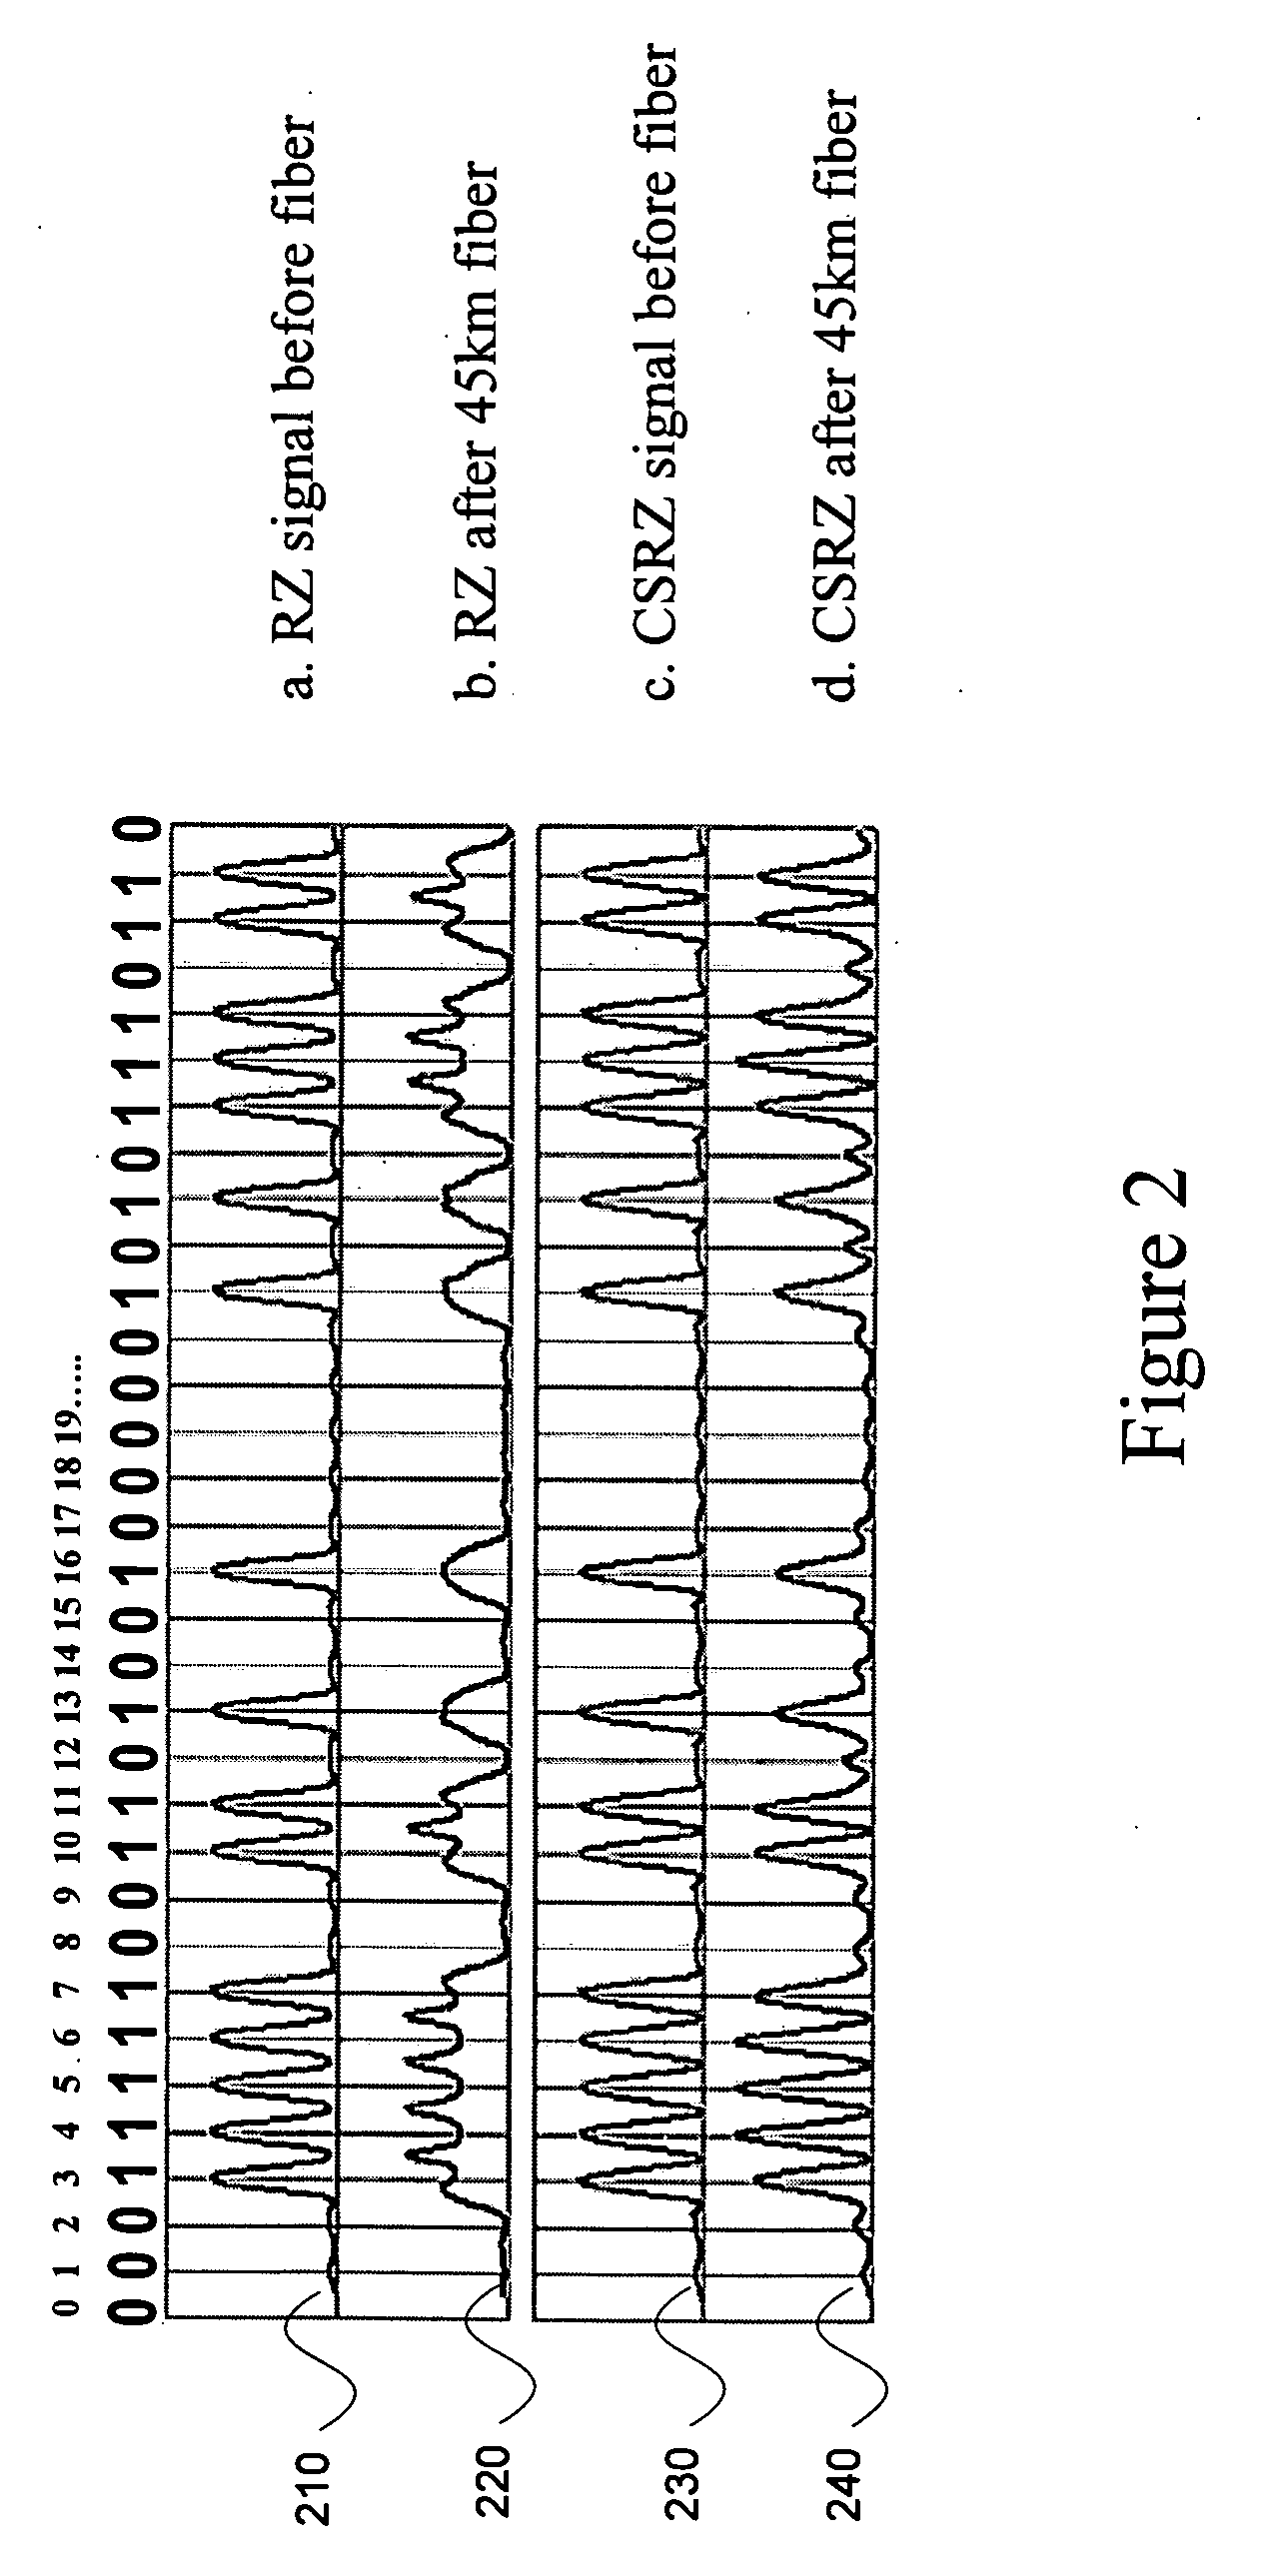 System and method for generating optical return-to-zero signals with differential bi-phase shift and frequency chirp